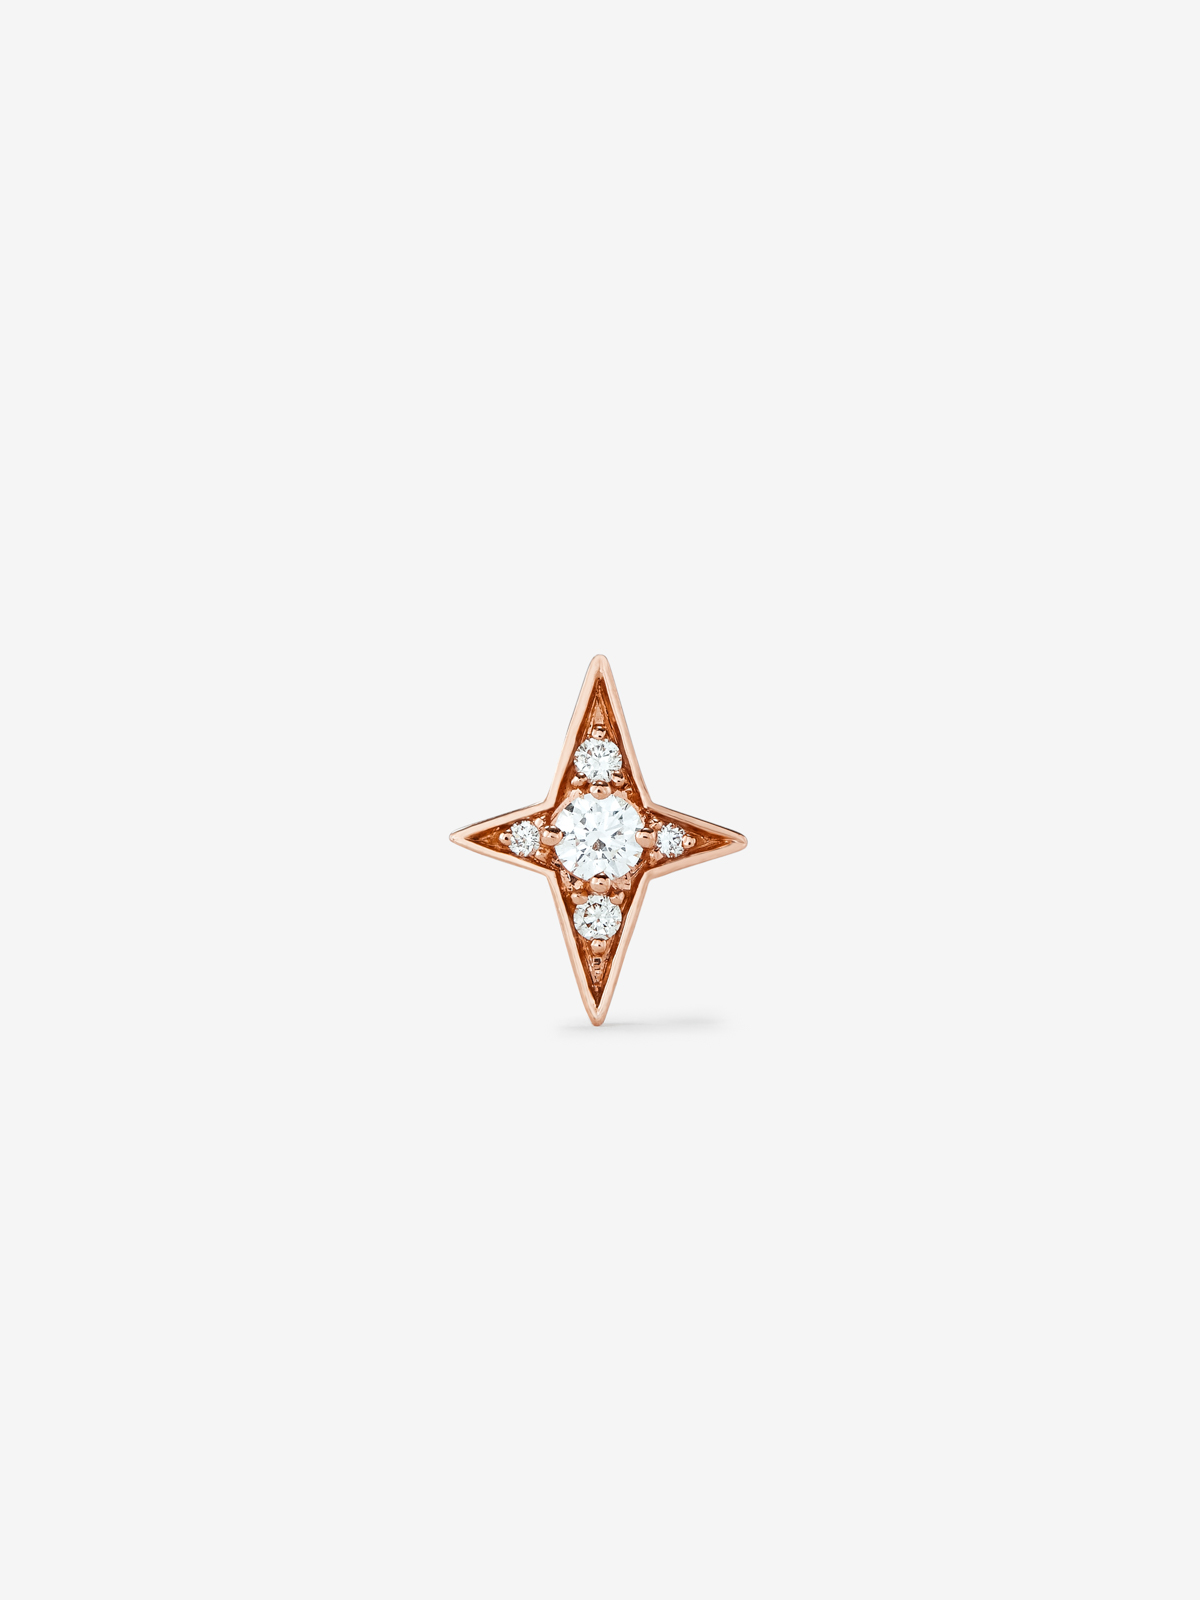 Individual 18K rose gold star earring with diamonds